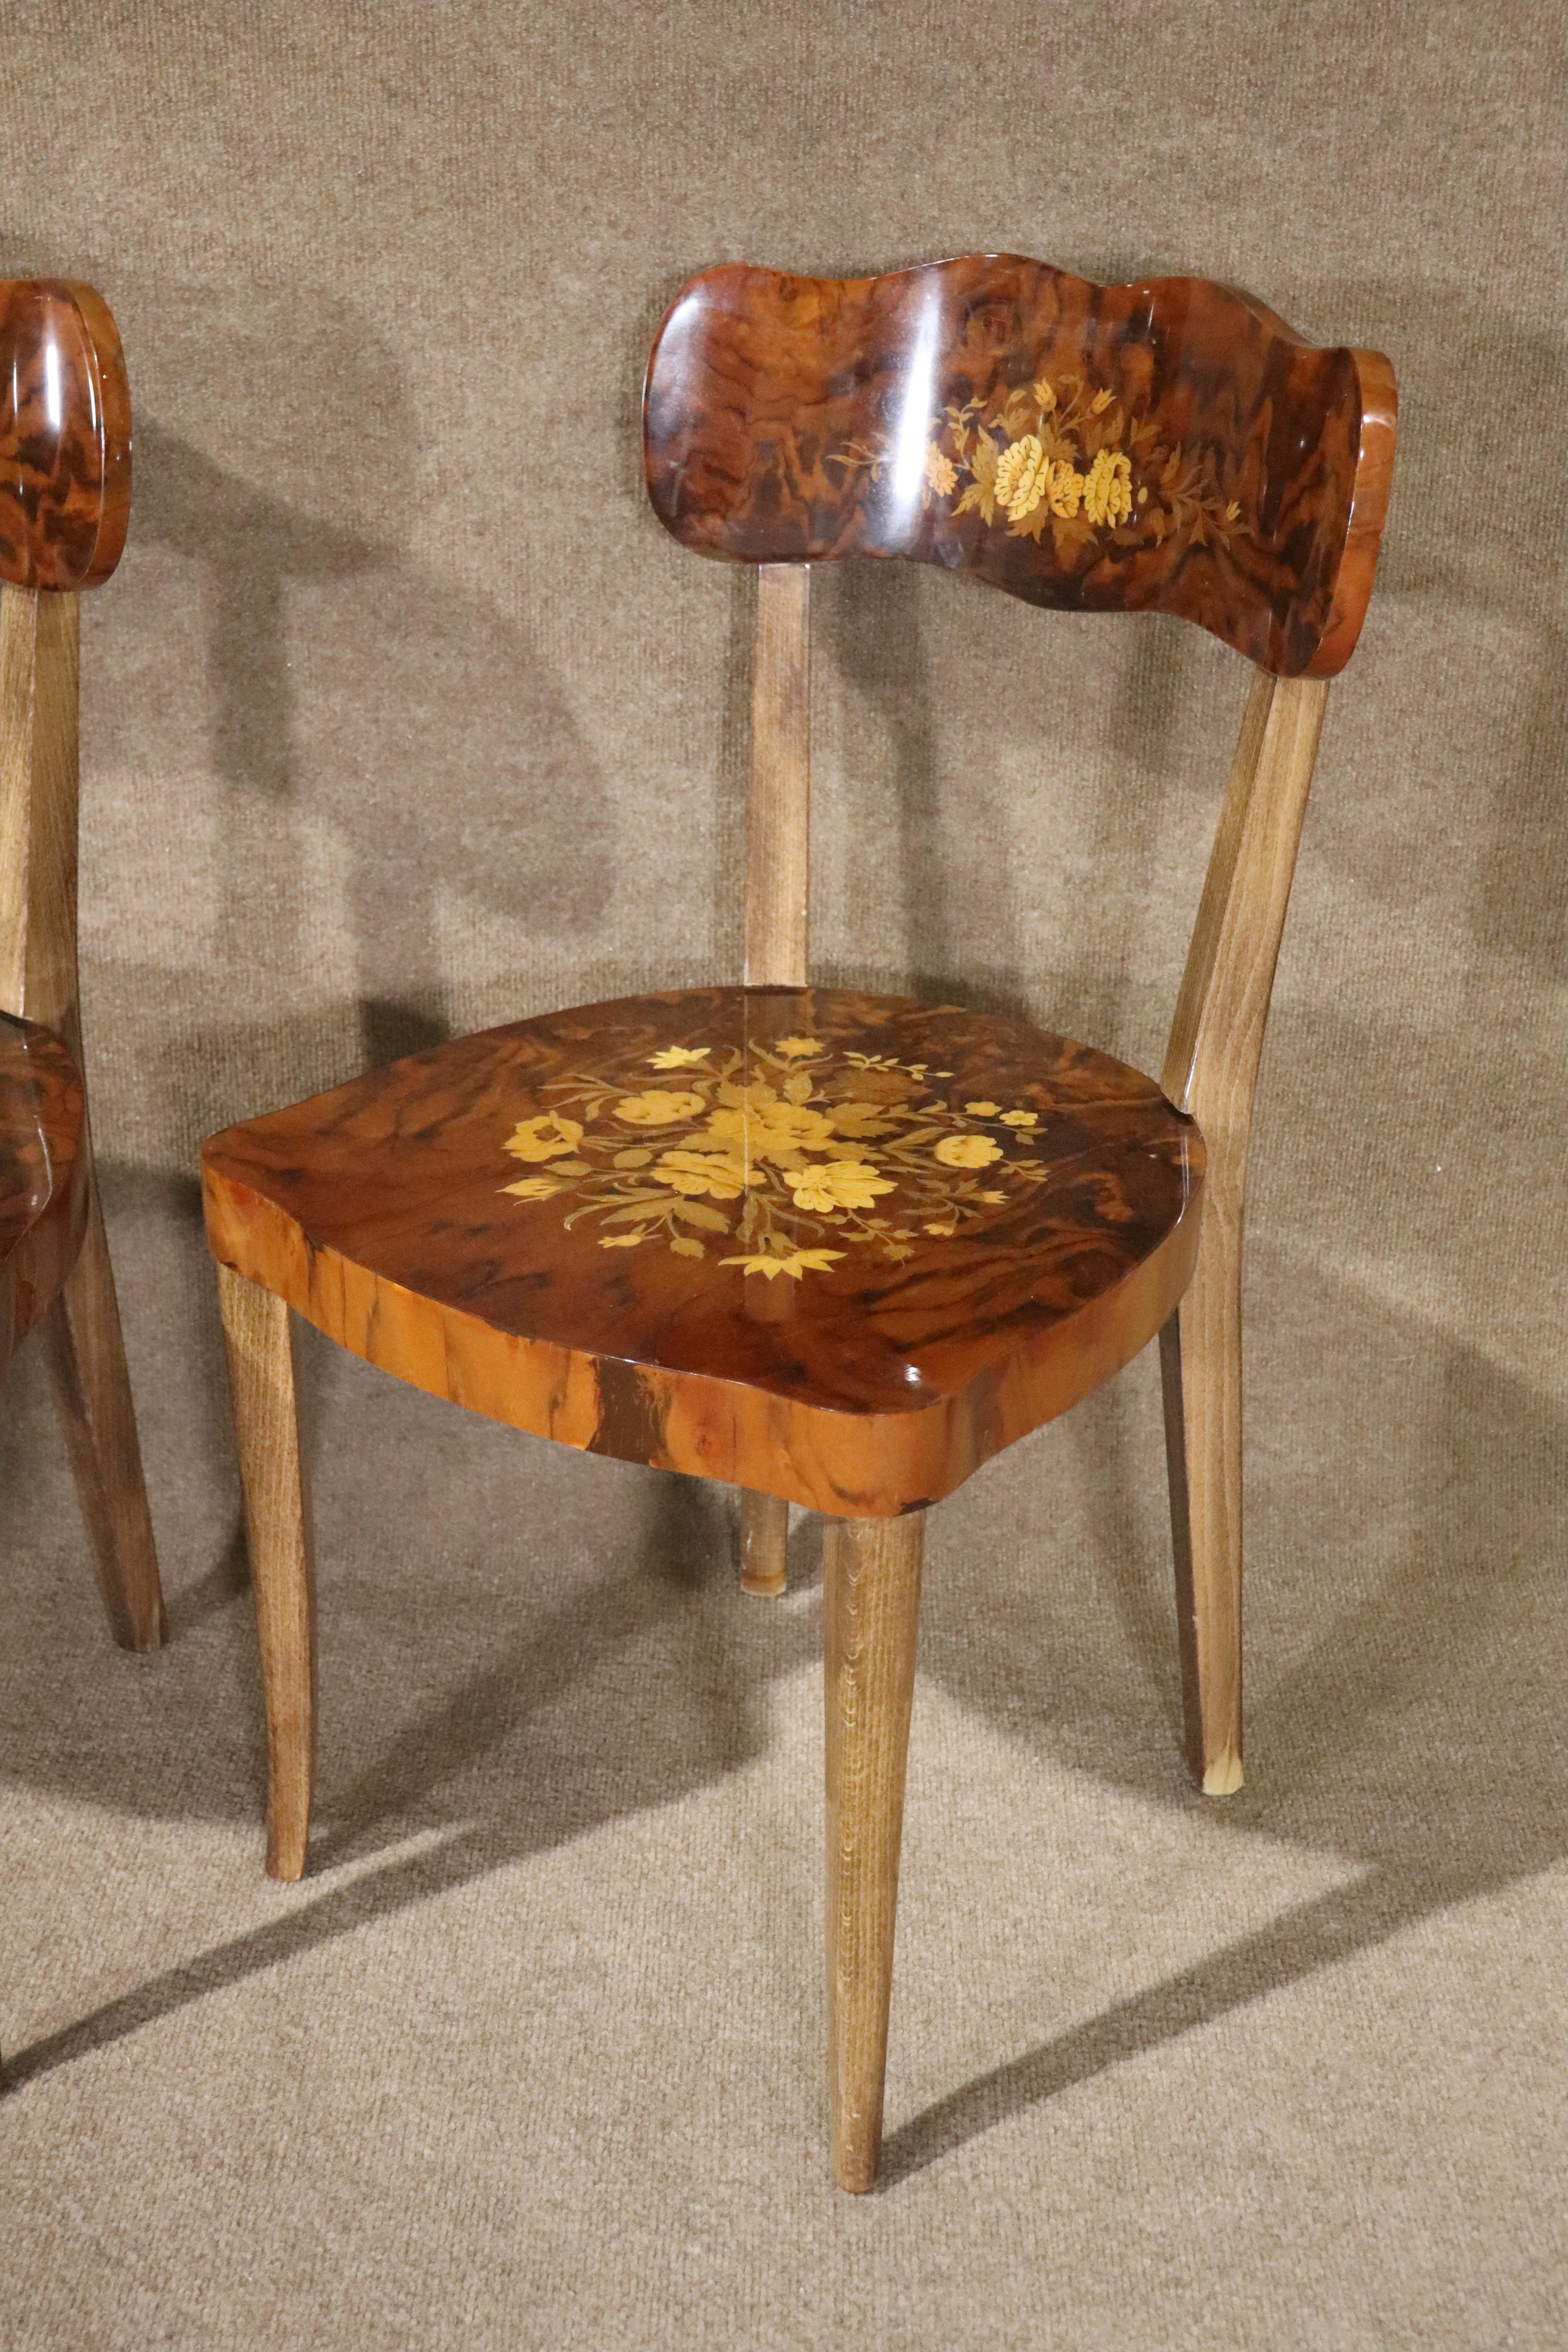 Set of four Italian chairs by Notturno Intarsio. Features stunning marquetry inlay designs on backs and seats.
Please confirm location NY or NJ